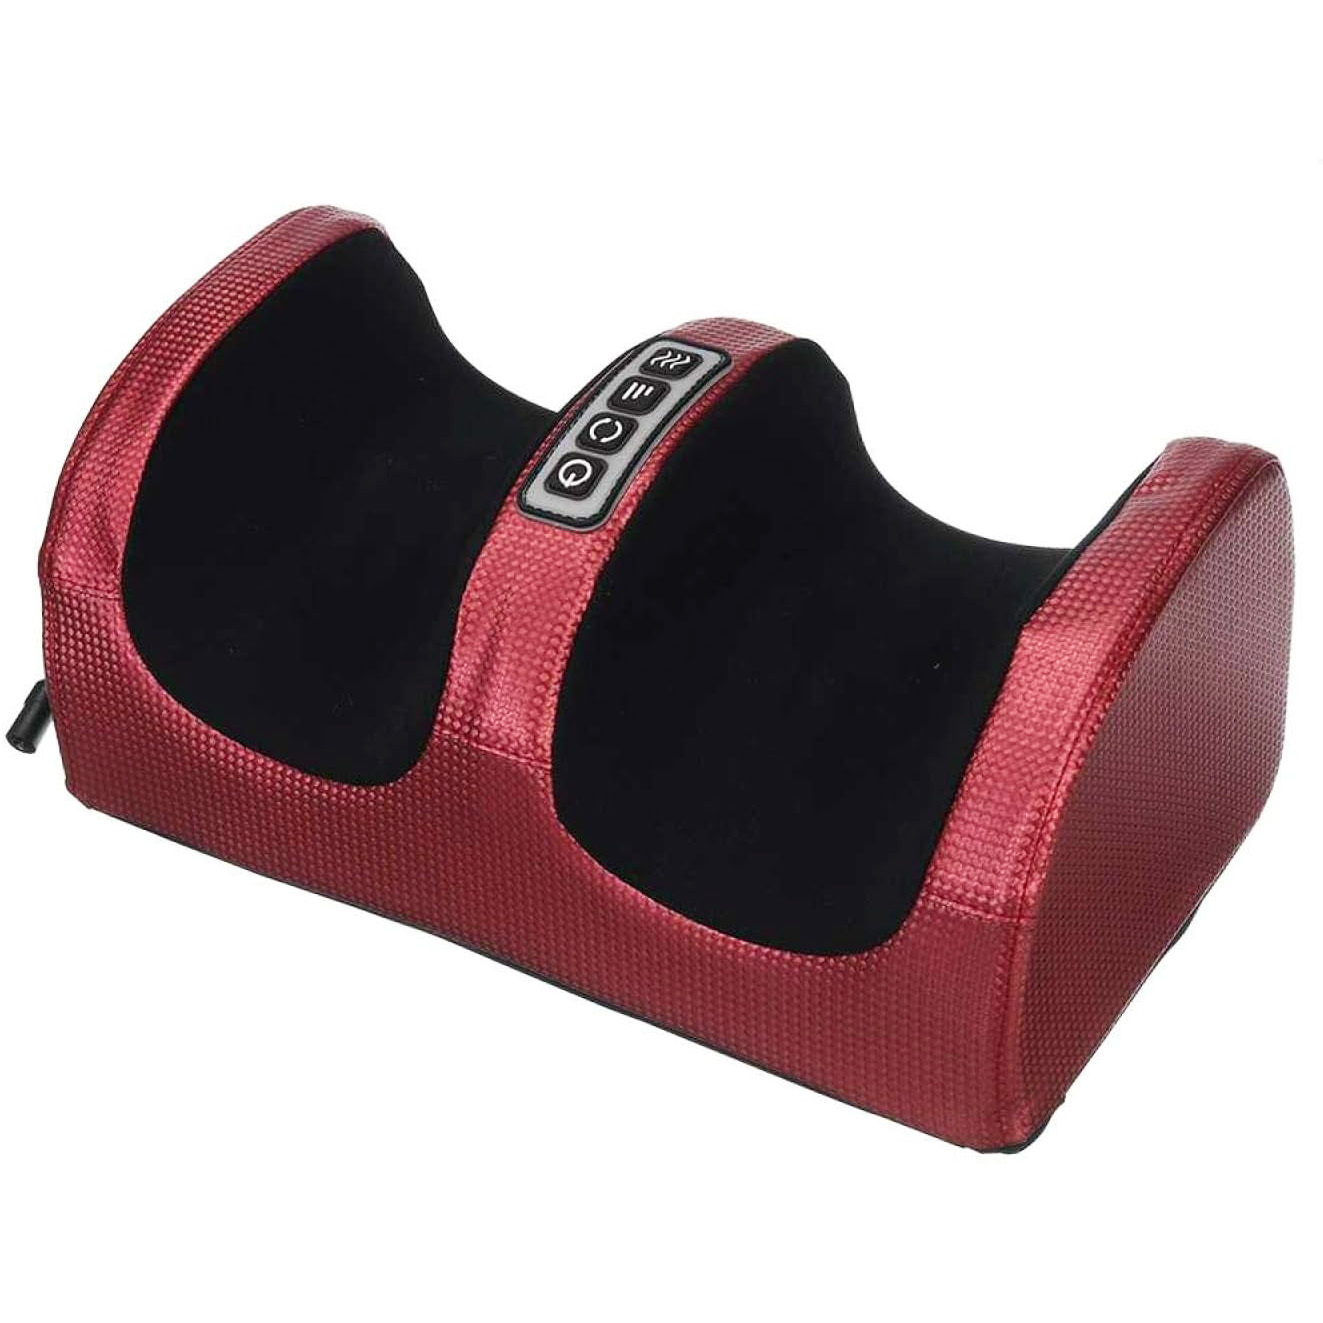 Therapeutic Heated Foot Massager Electric Heating Massage Reflexology Calf Leg Pain Relief Relaxation